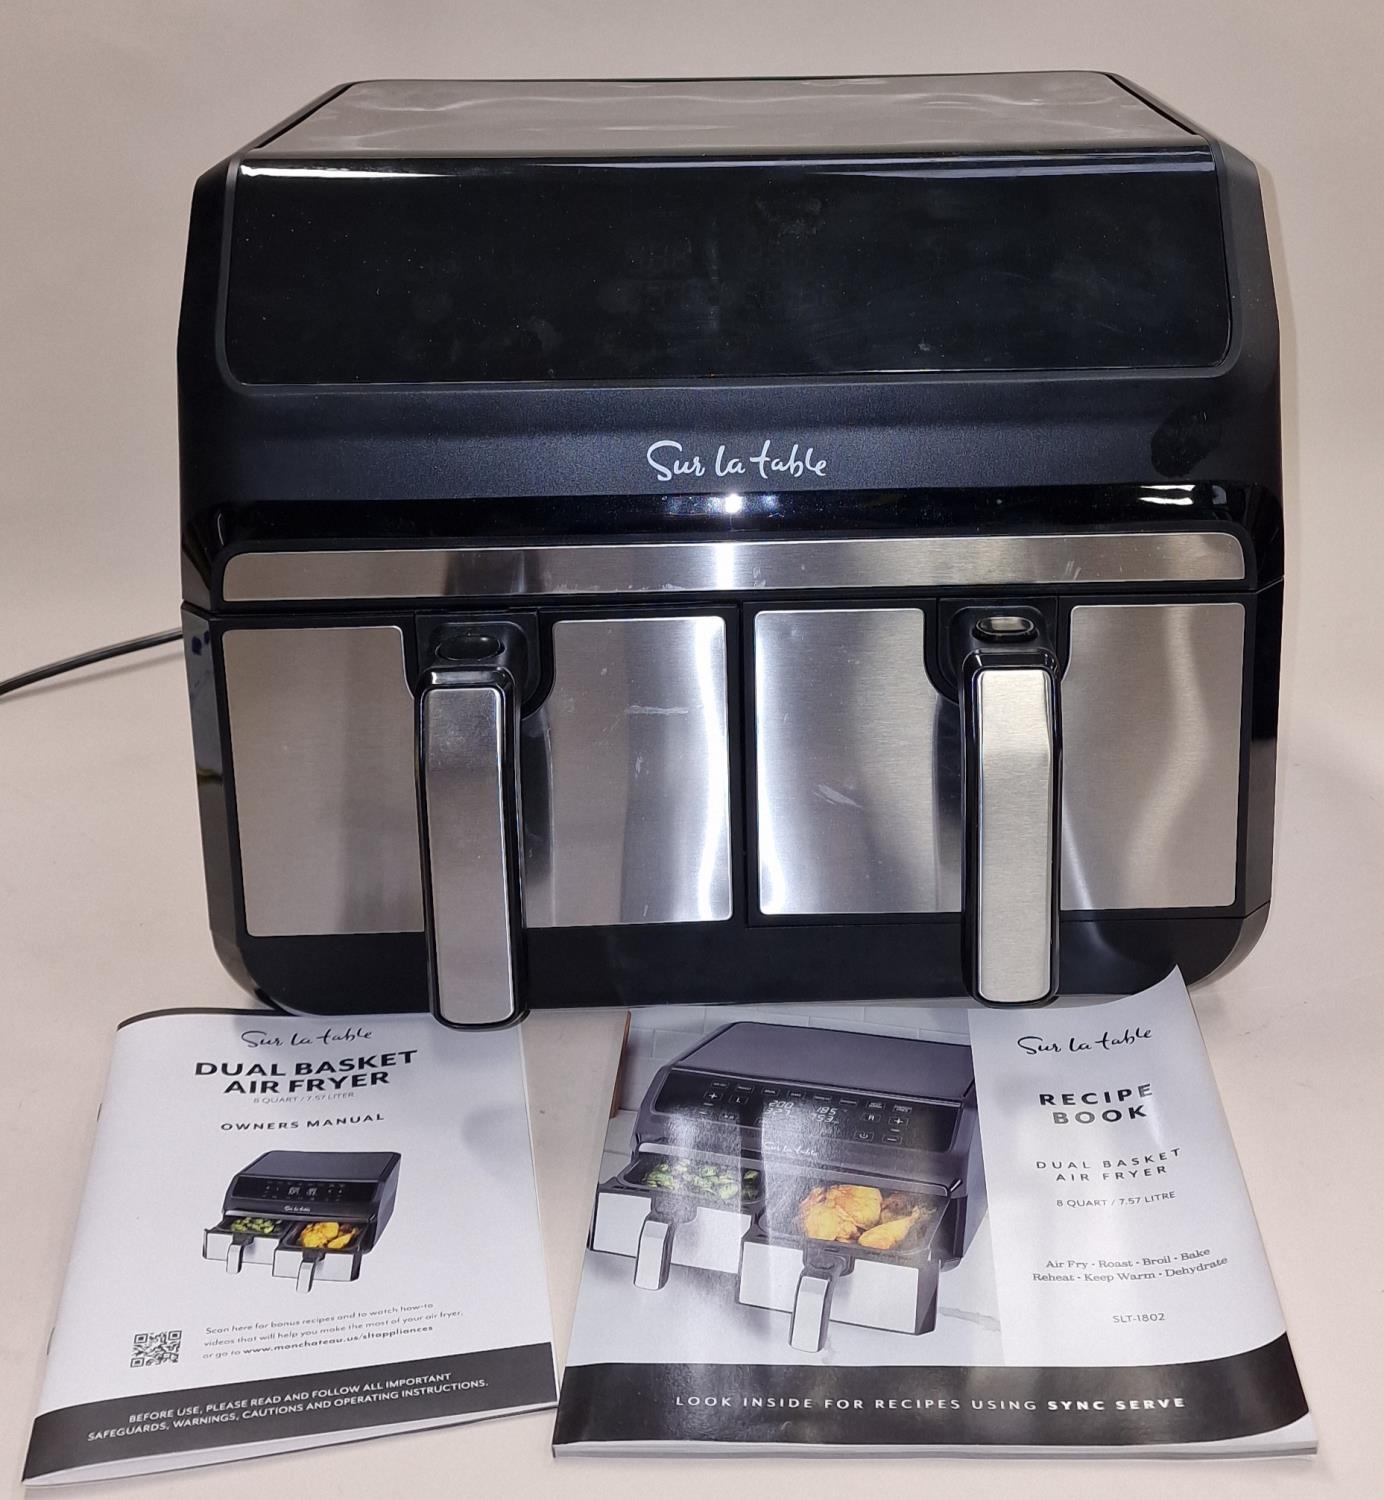 "Sur la Table" two drawer air fryer - seperate cooking facilities with instruction/recipe books in